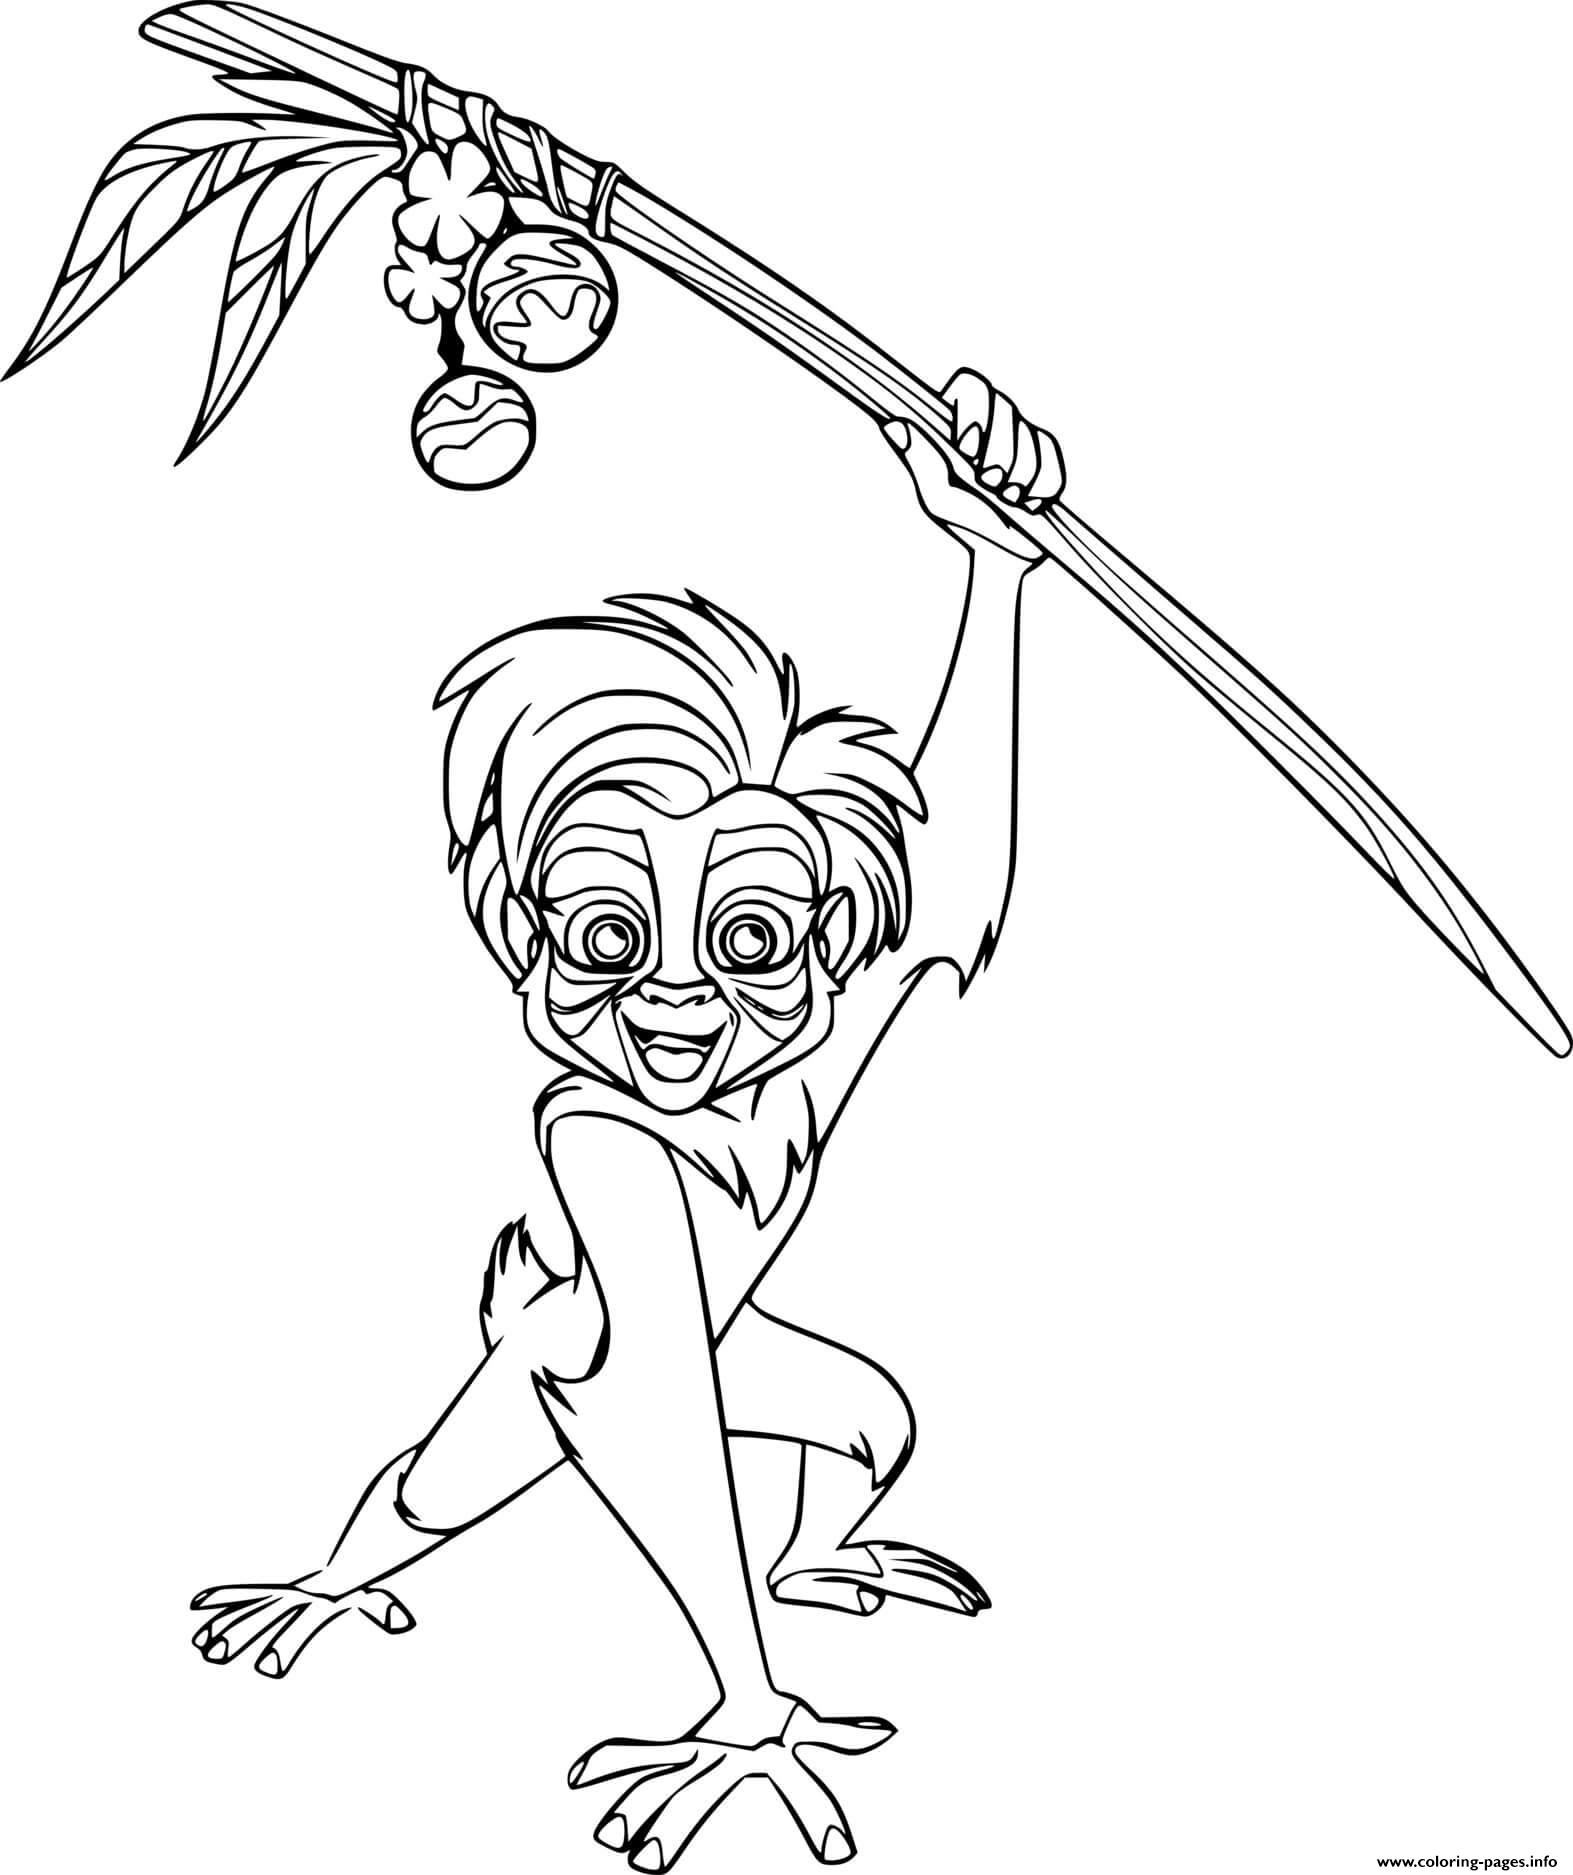 Young Rafiki coloring pages